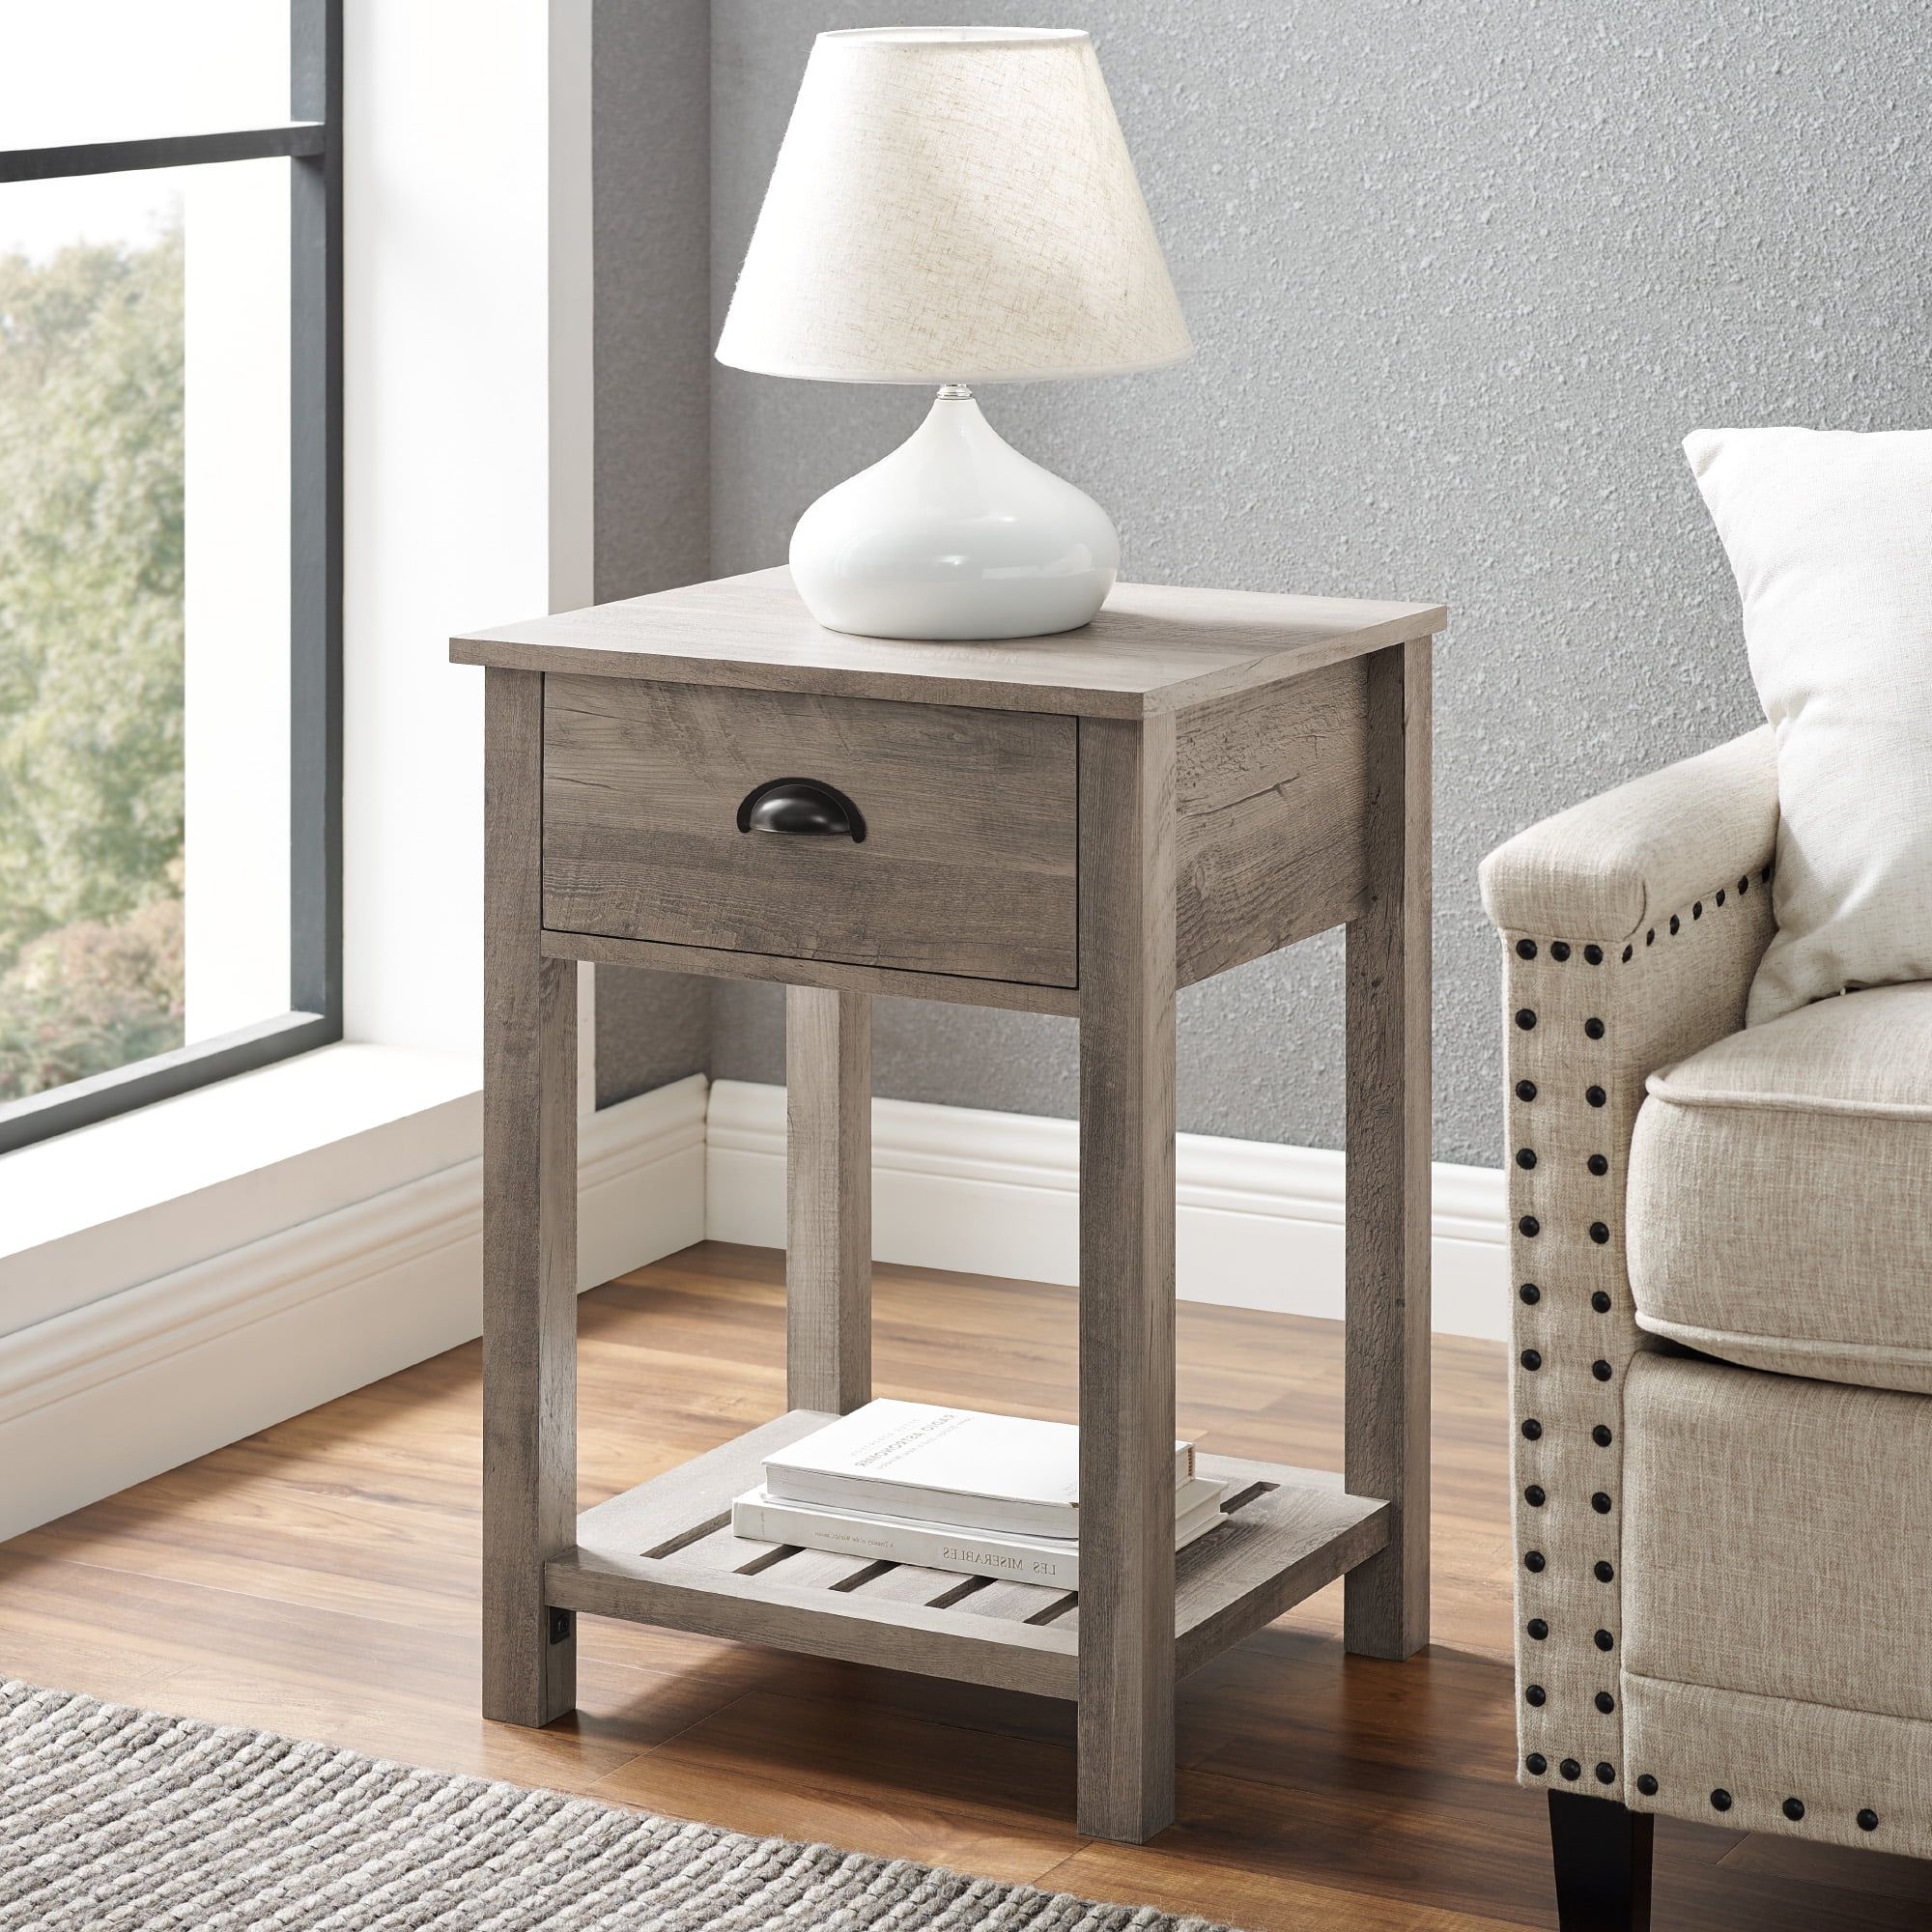 Woven Paths Farmhouse Single Drawer Open Shelf End Table, Grey Wash Pertaining To Rustic Gray End Tables (Gallery 16 of 20)